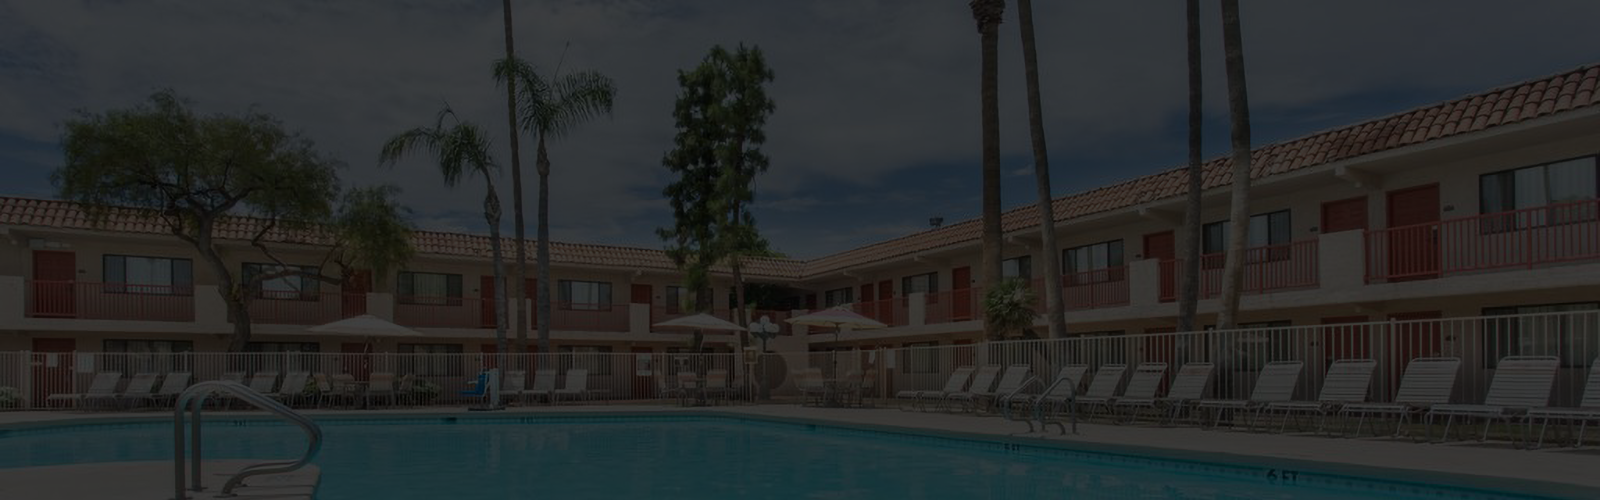 Best Western Dobson Ranch Case Study > Read More